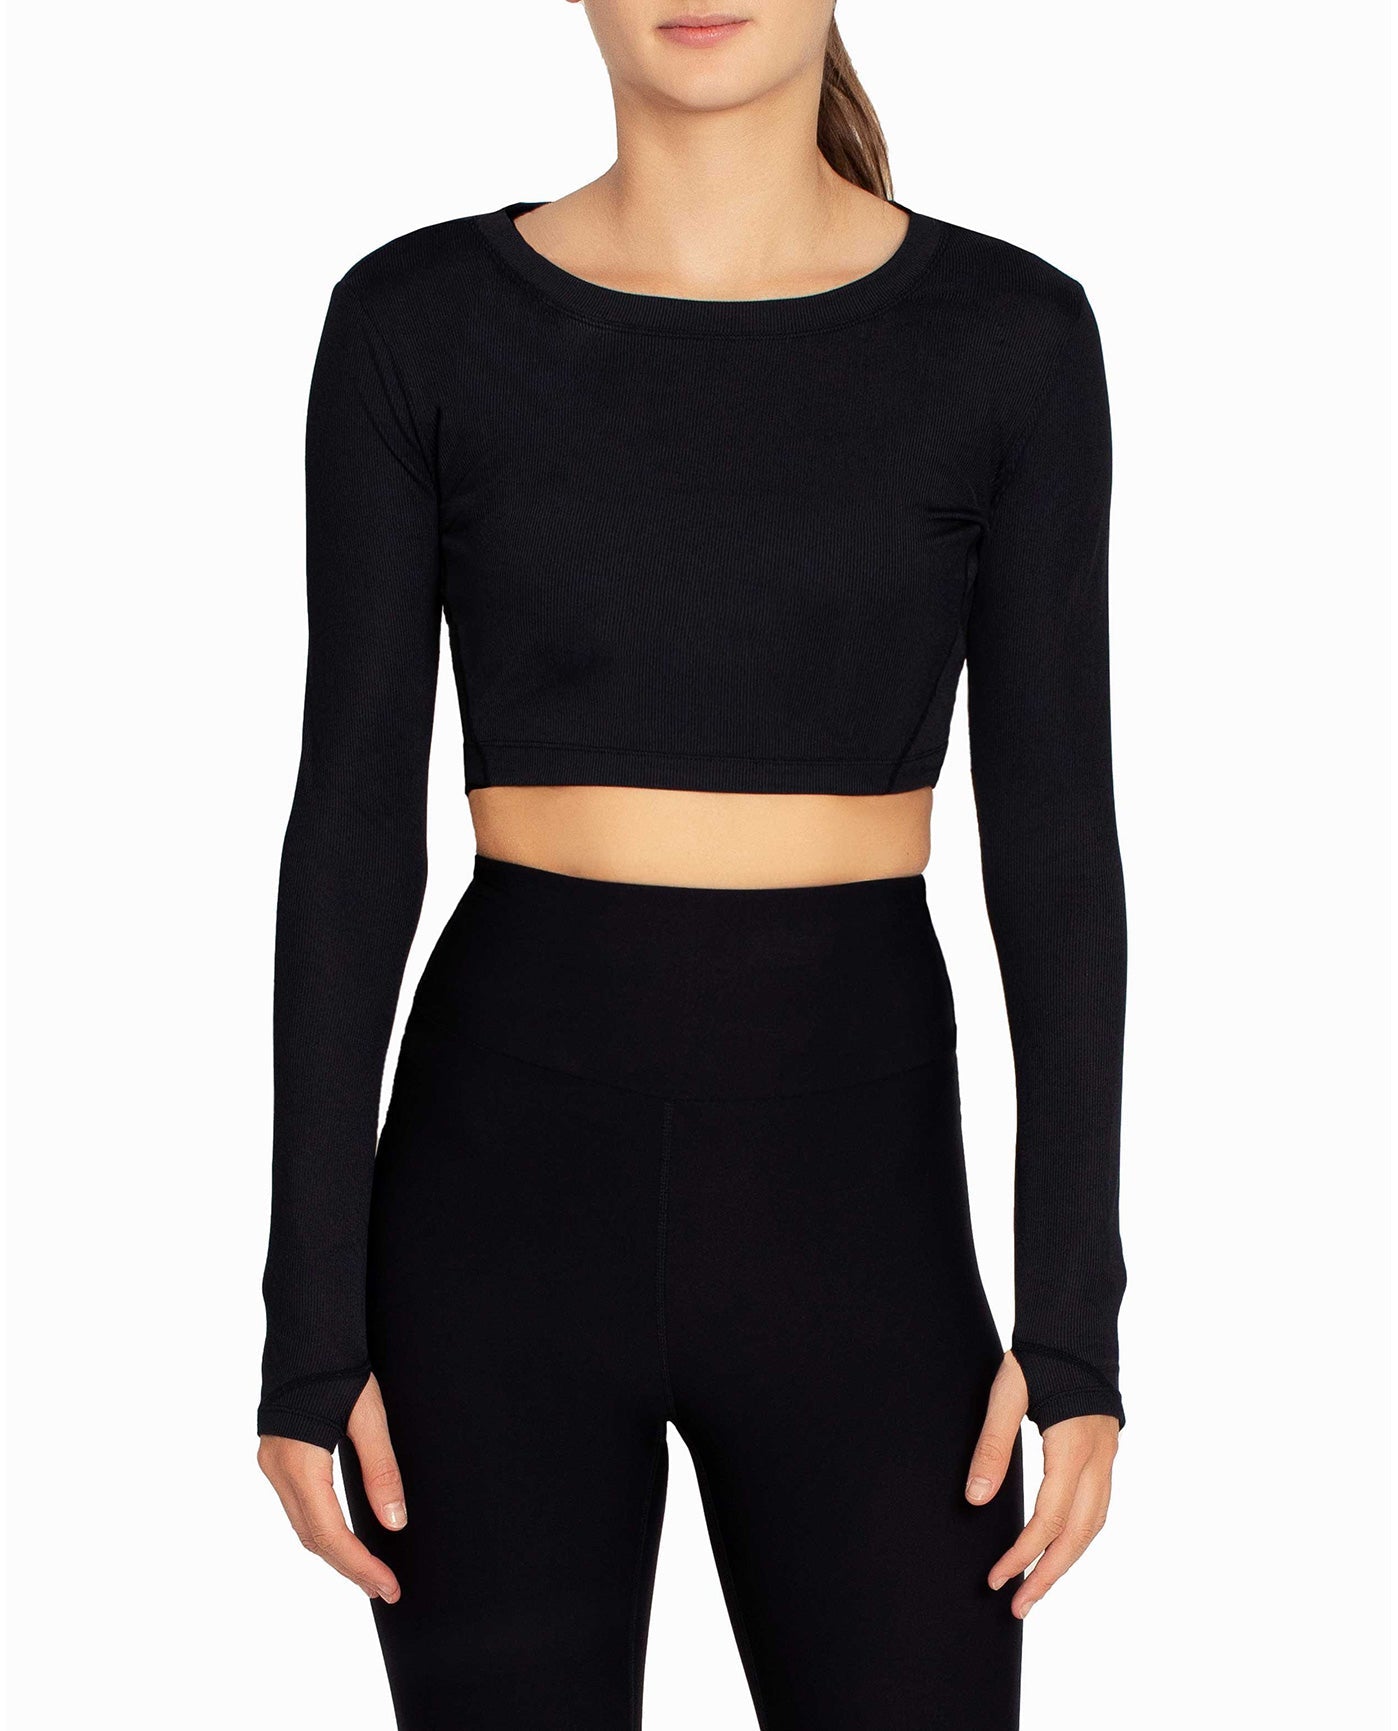 FRONT OF CROPPED ACTIVE LONG SLEEVE TOP | JET BLACK